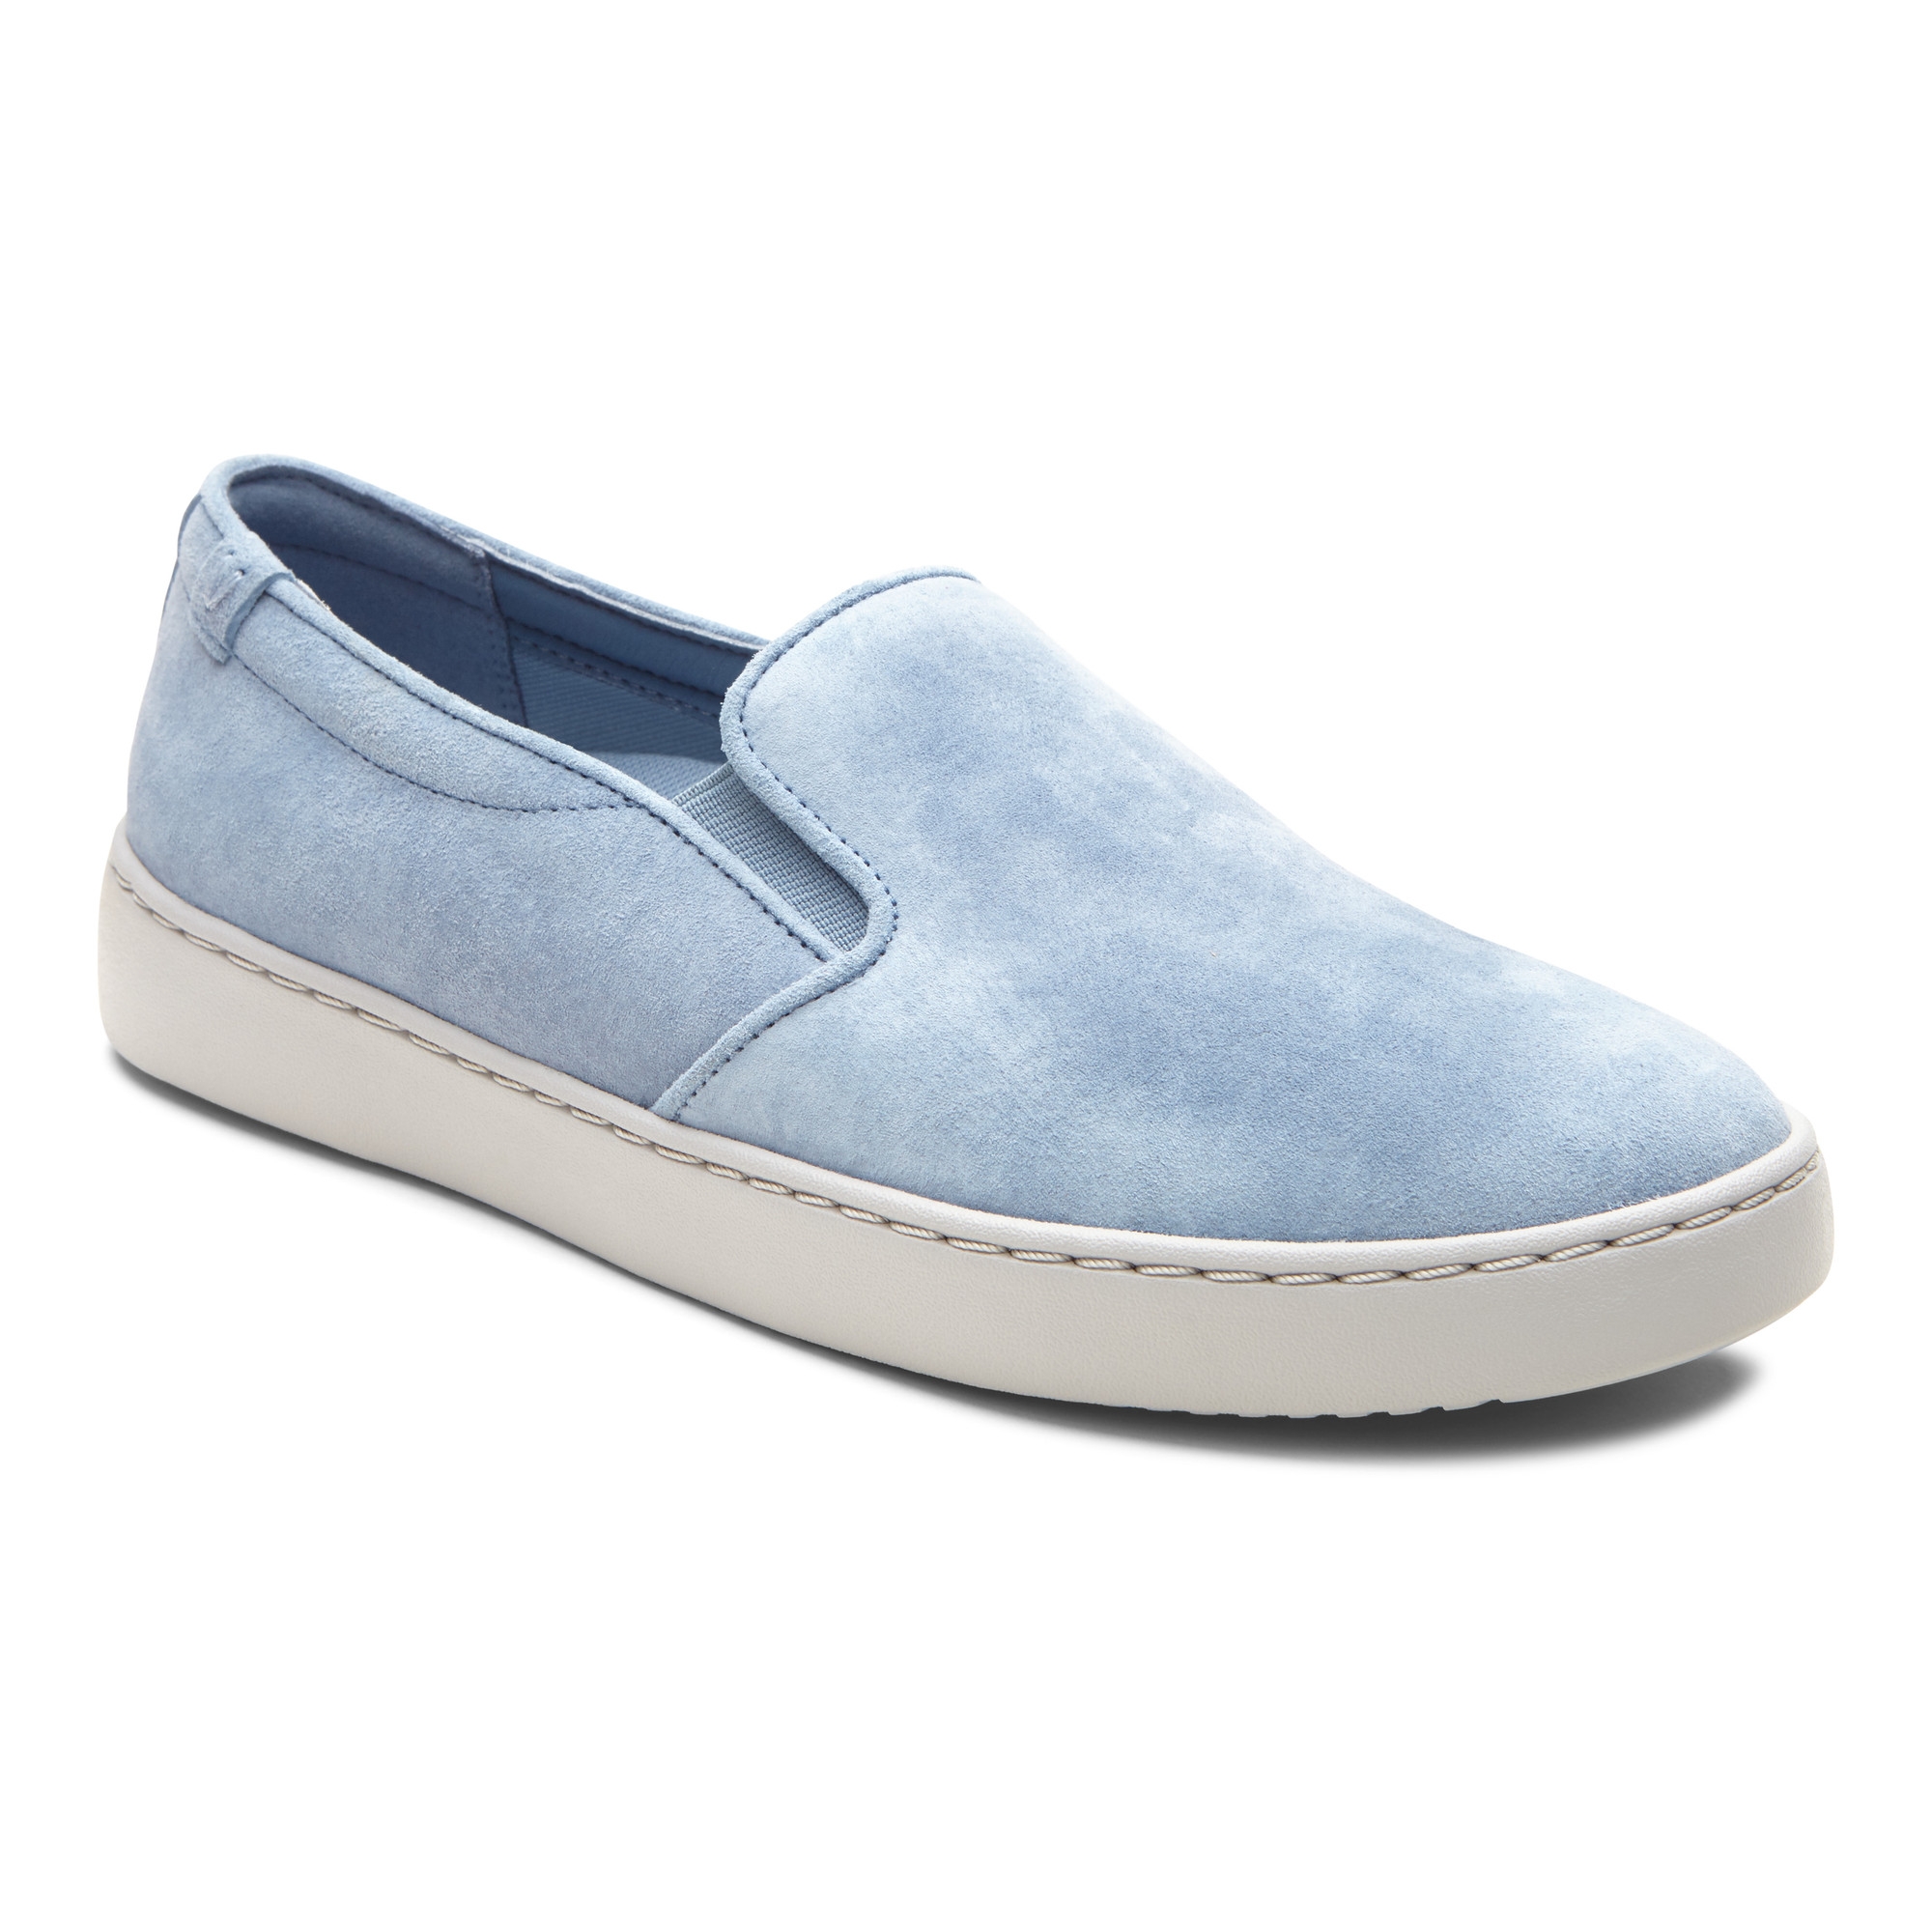 Avery Pro Suede | Vionic Shoes